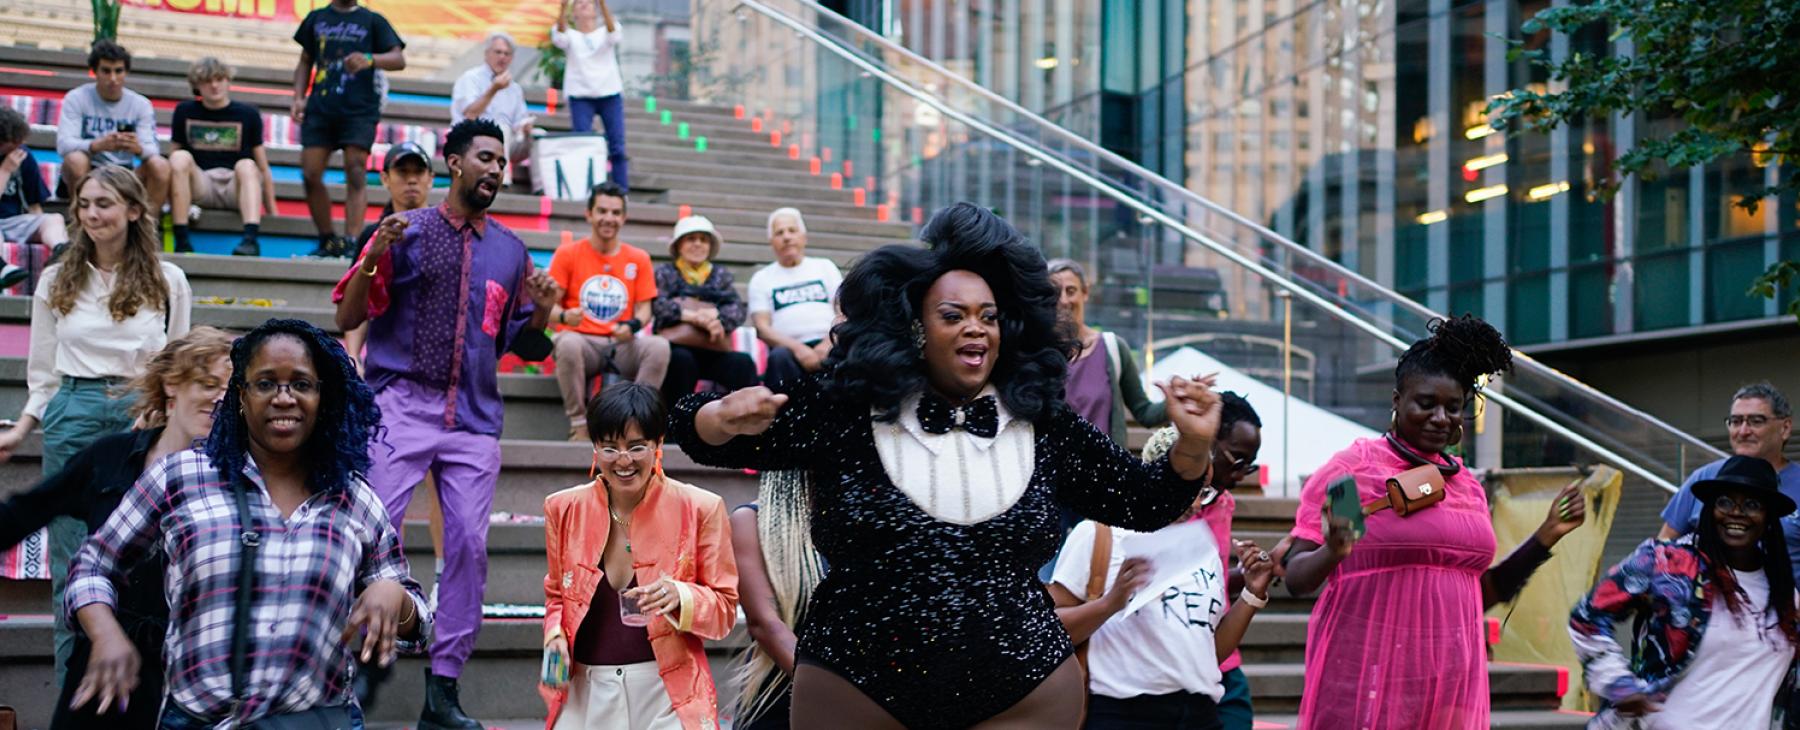 A Black drag queen, with a big afro and tuxedo body suit, leads a group in a dance.